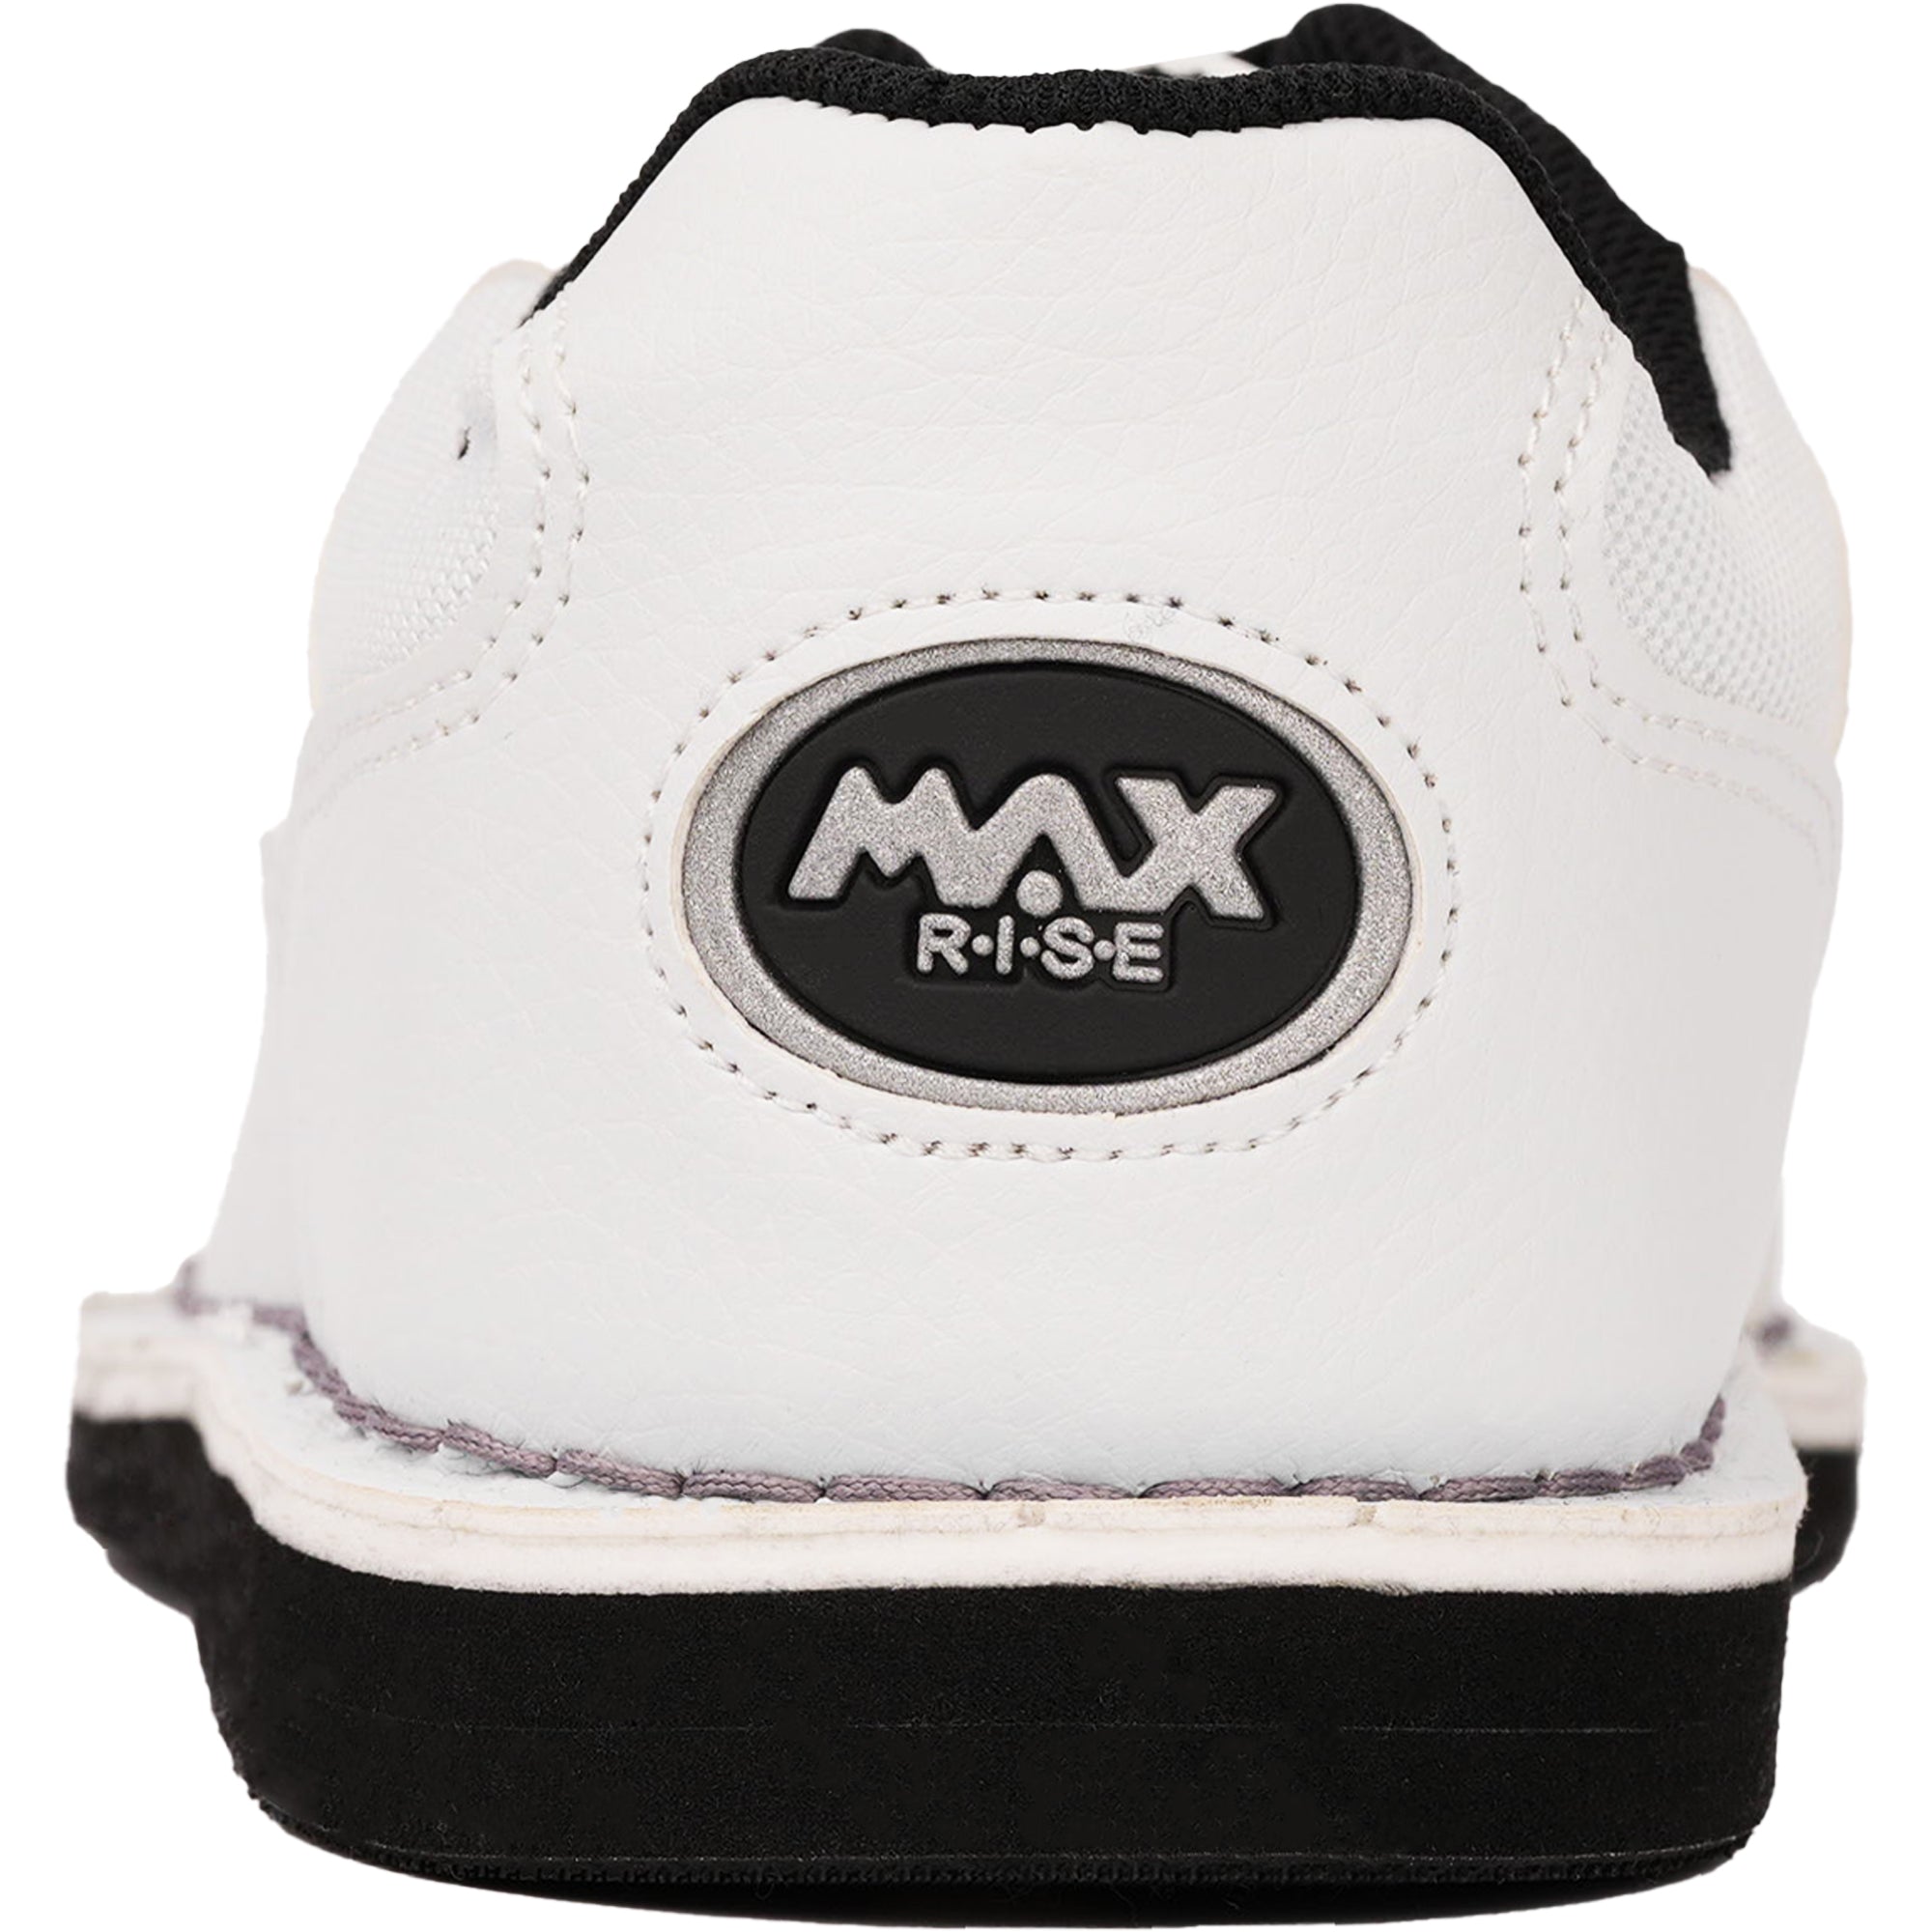 maxwelter max rise bowling shoes T-1 white right handed 3